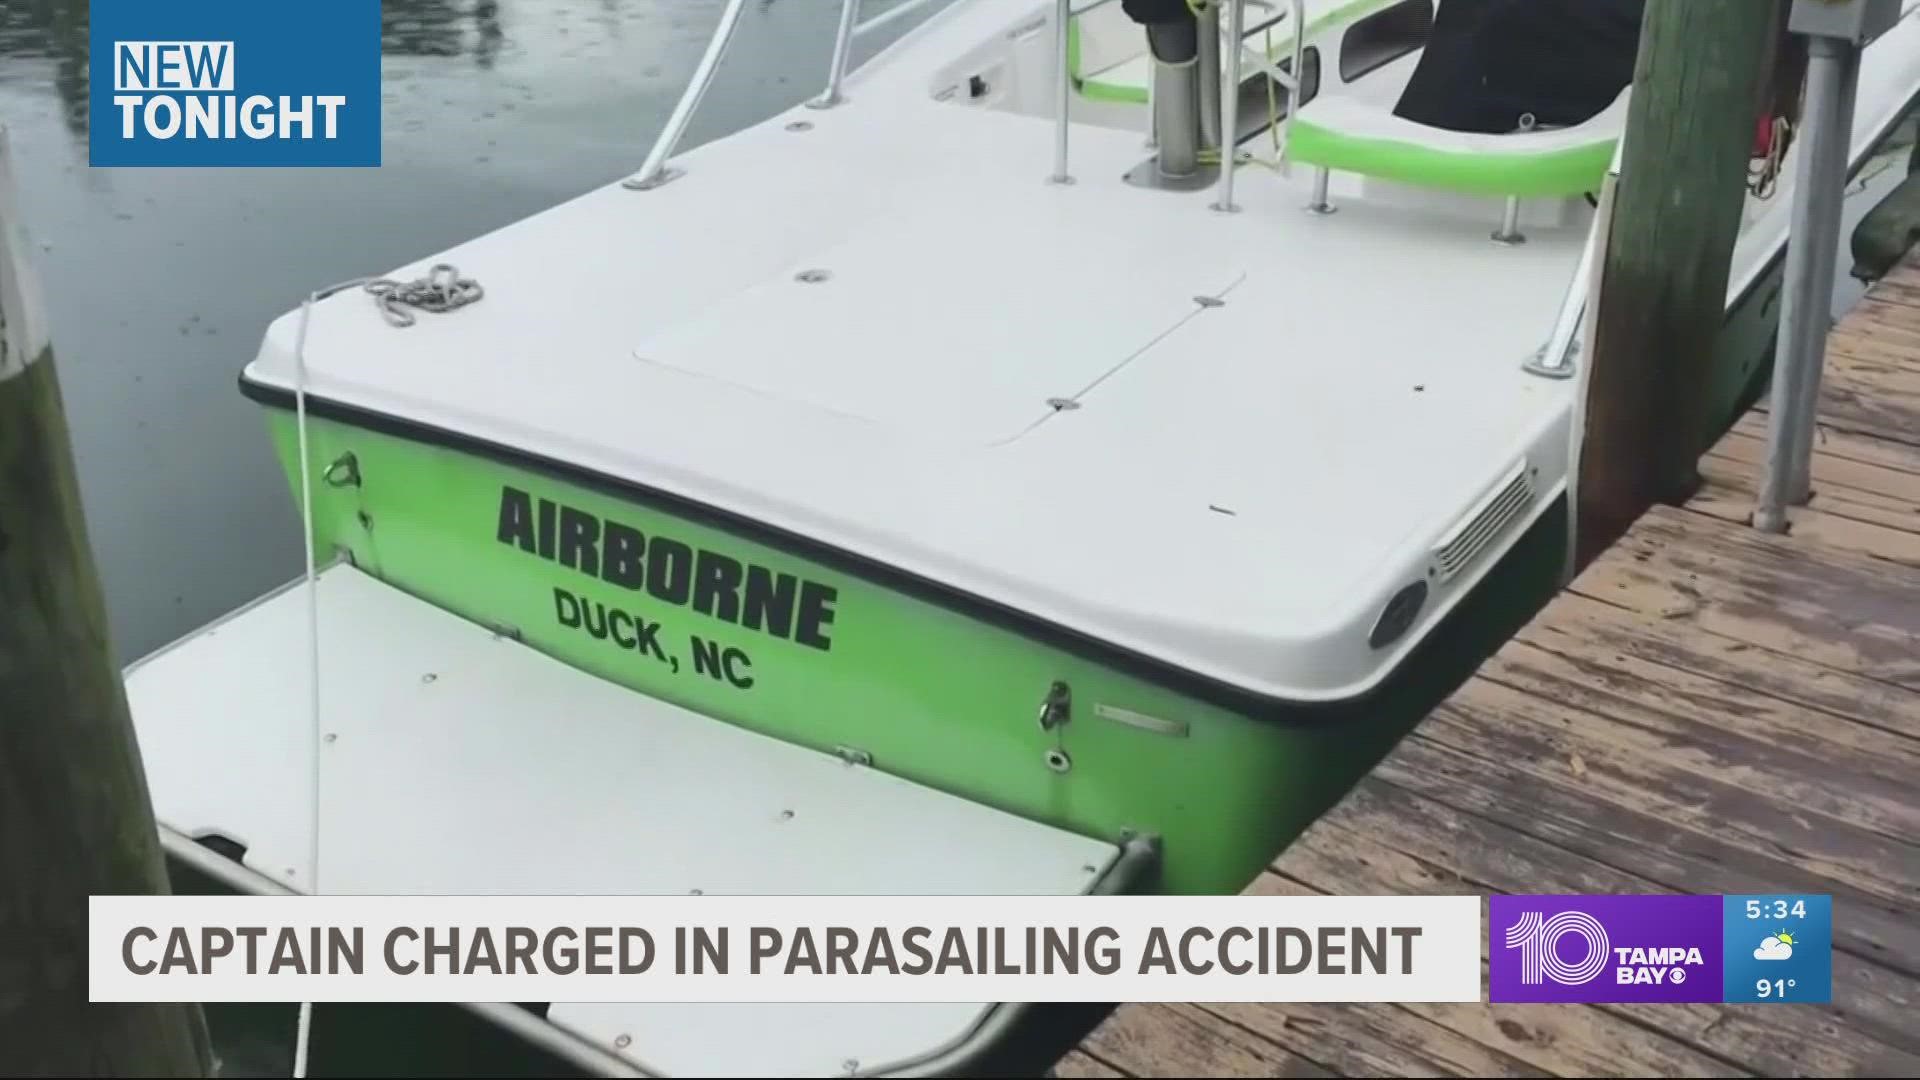 The family's attorney said the captain of the parasailing company decided to cut the line when storms rolled in so his boat wouldn't run aground.